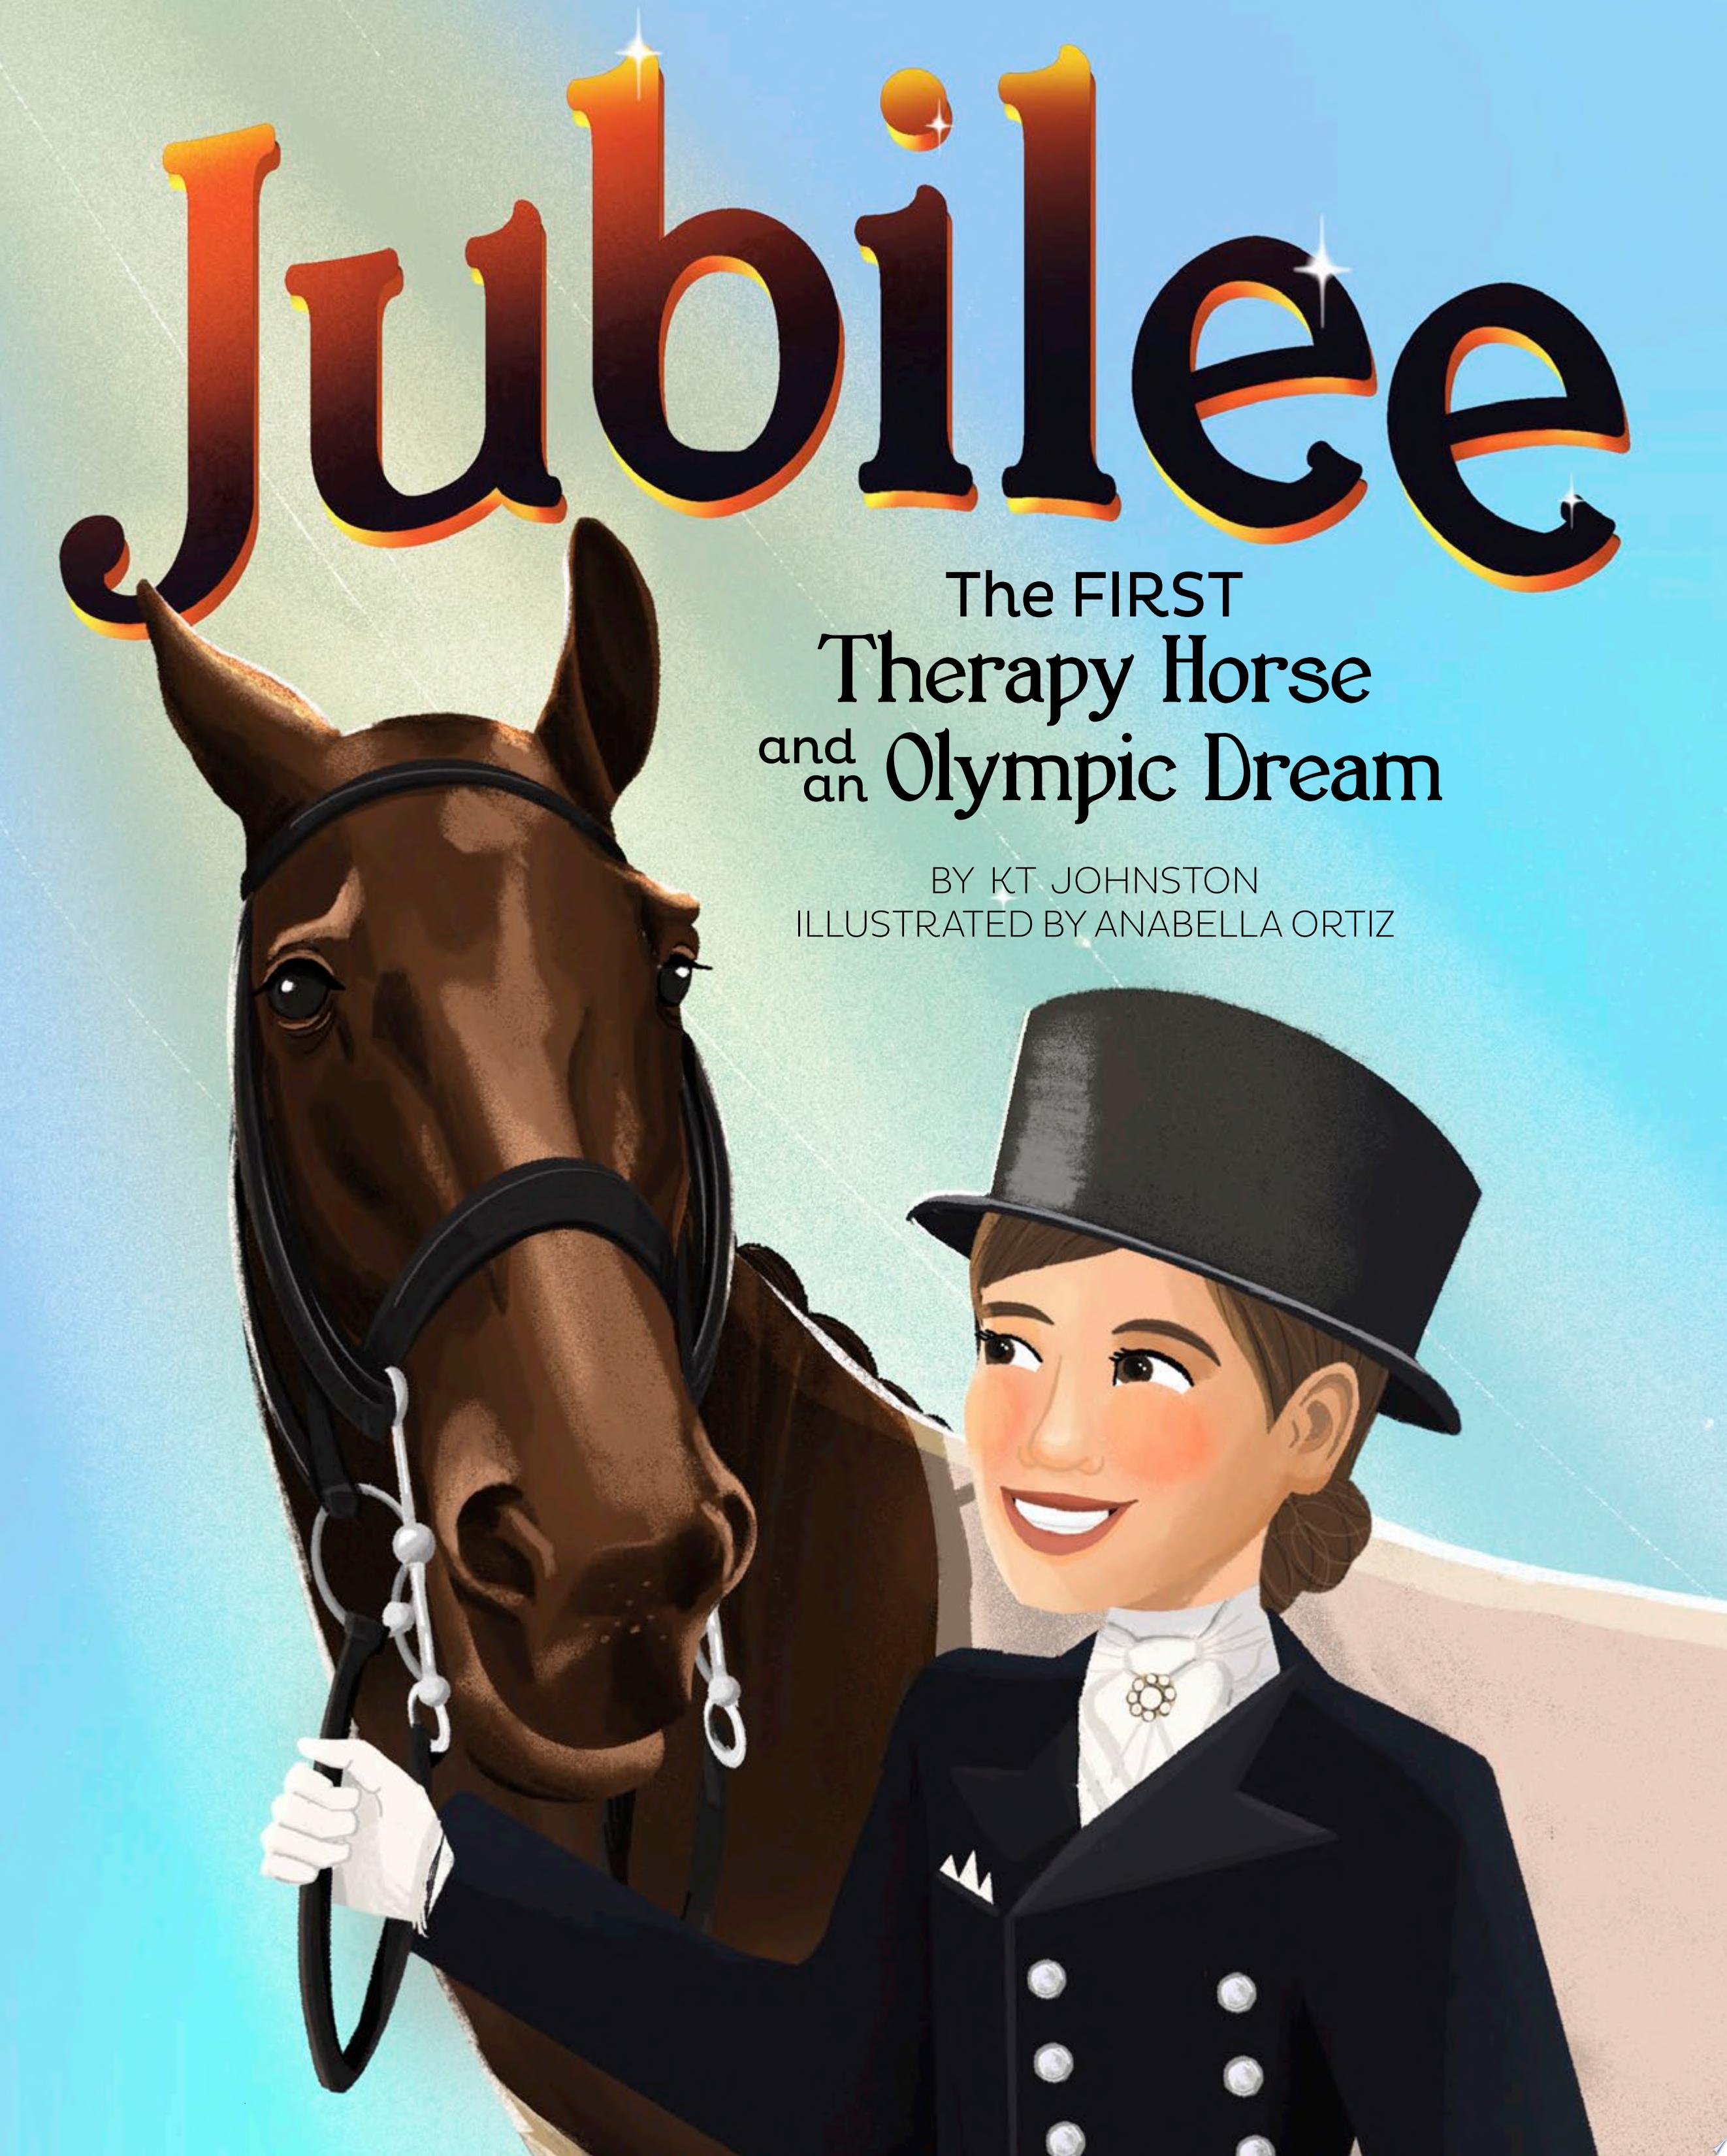 Image for "Jubilee"